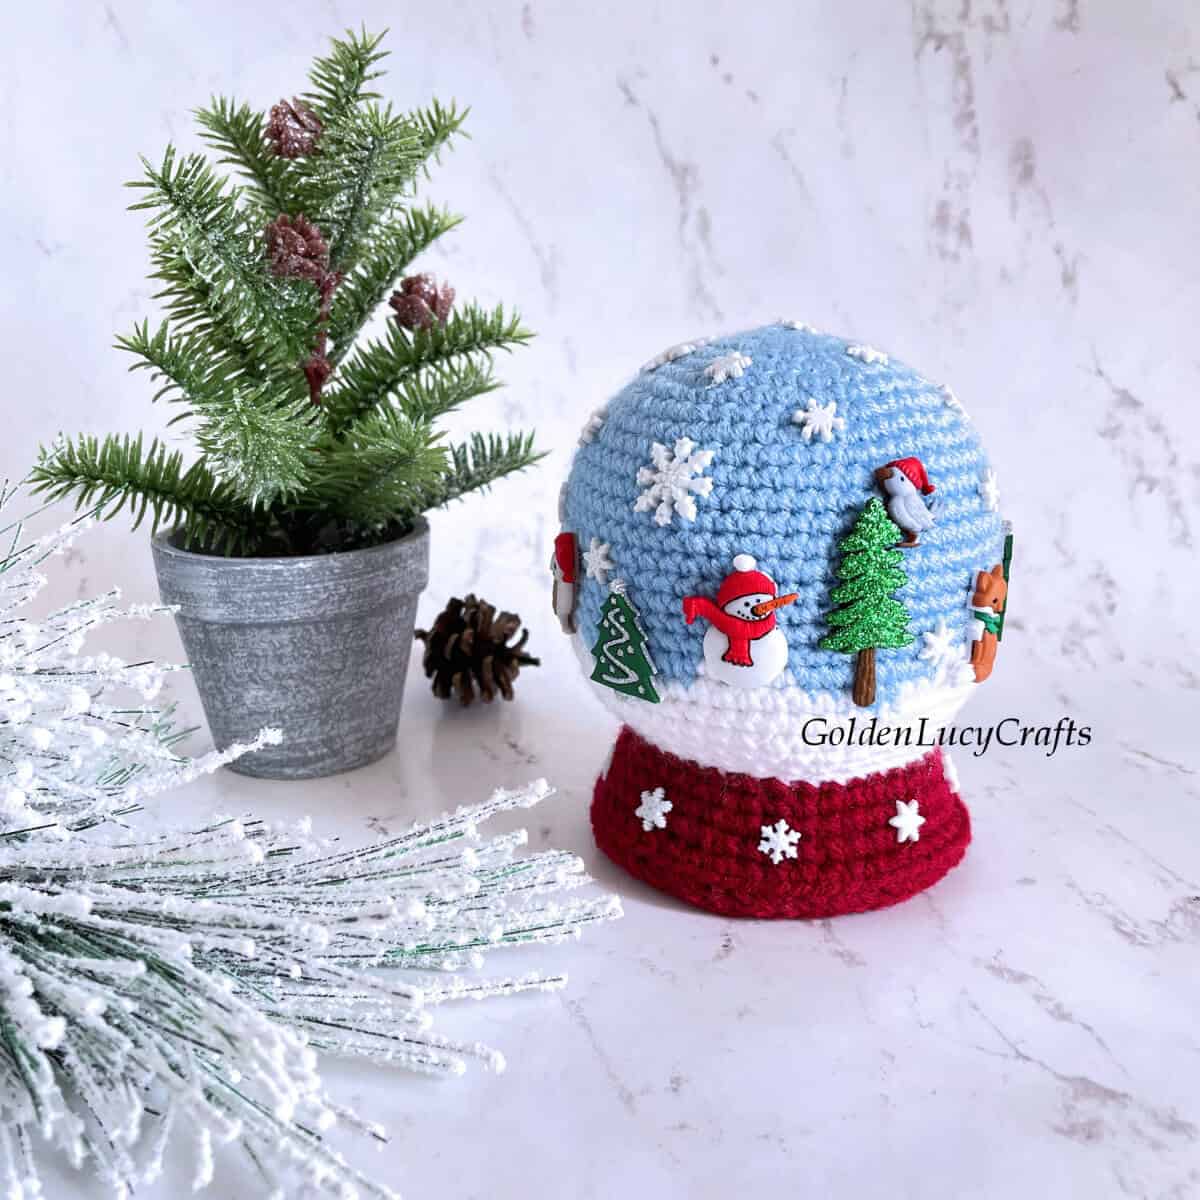 Crocheted snowglobe toy embellished with winter-themed buttons.